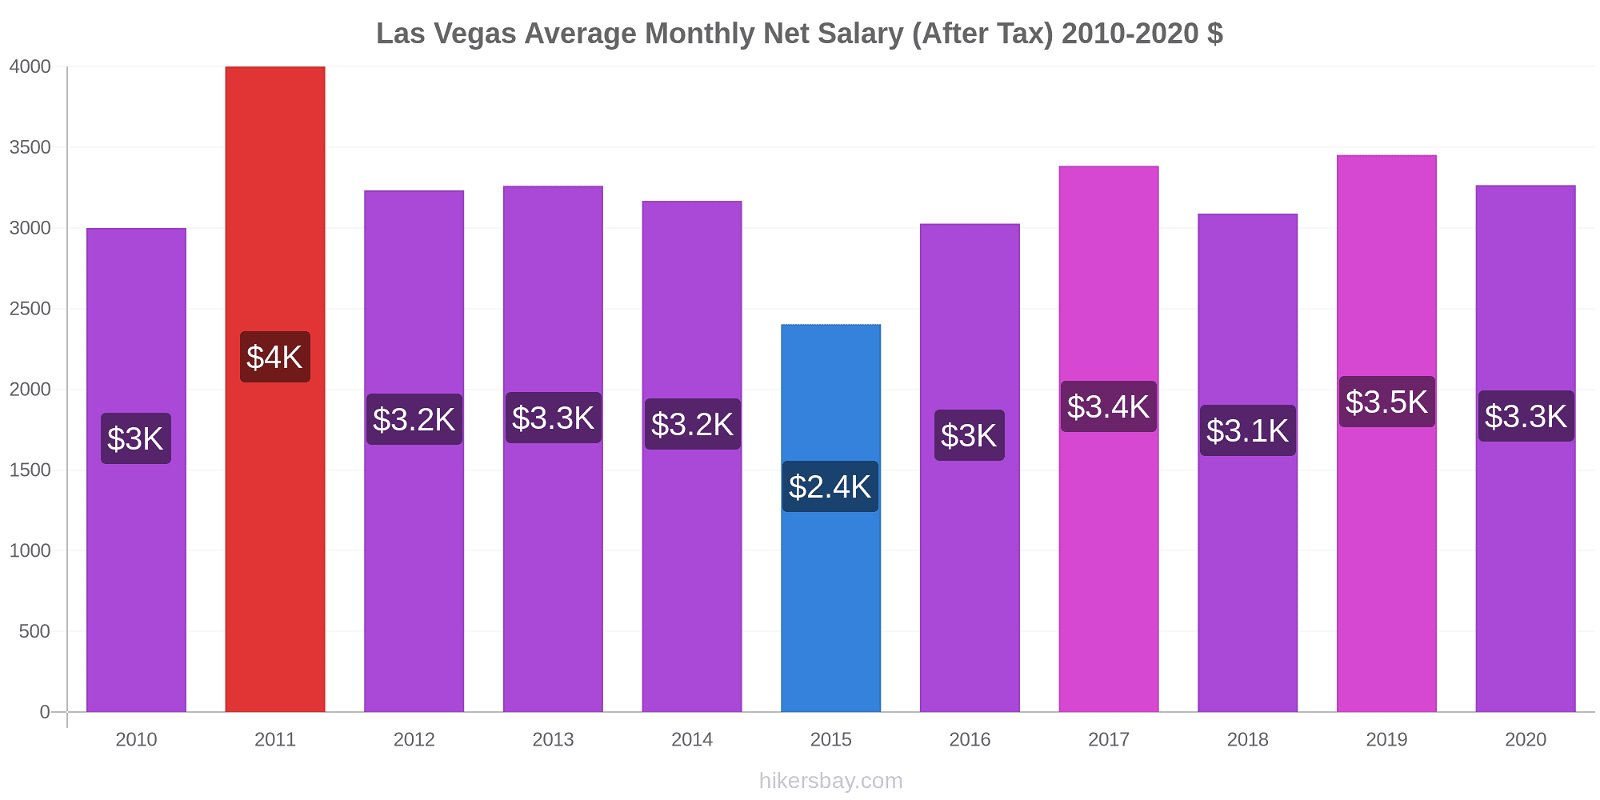 Las Vegas price changes Average Monthly Net Salary (After Tax) hikersbay.com